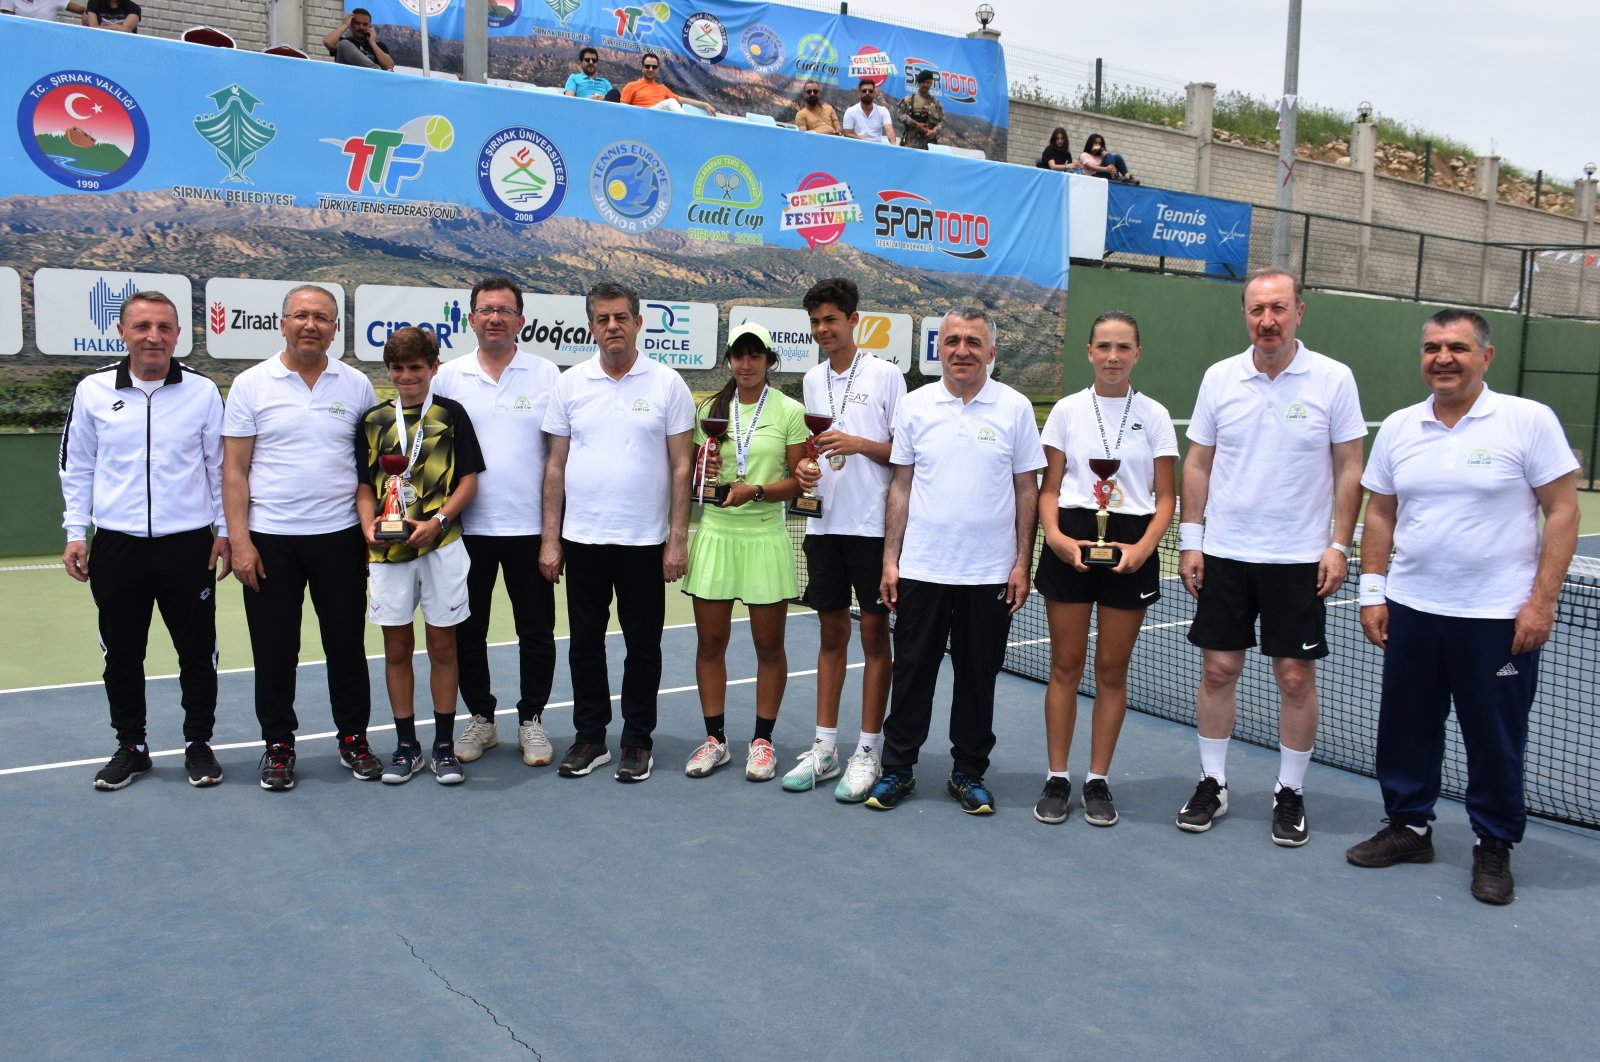 Winners and dignitaries pose for a photo on the final day of the Cudi Cup International Tennis Tournament, Şırnak, southeastern Turkey, May 22, 2022. (AA Photo)